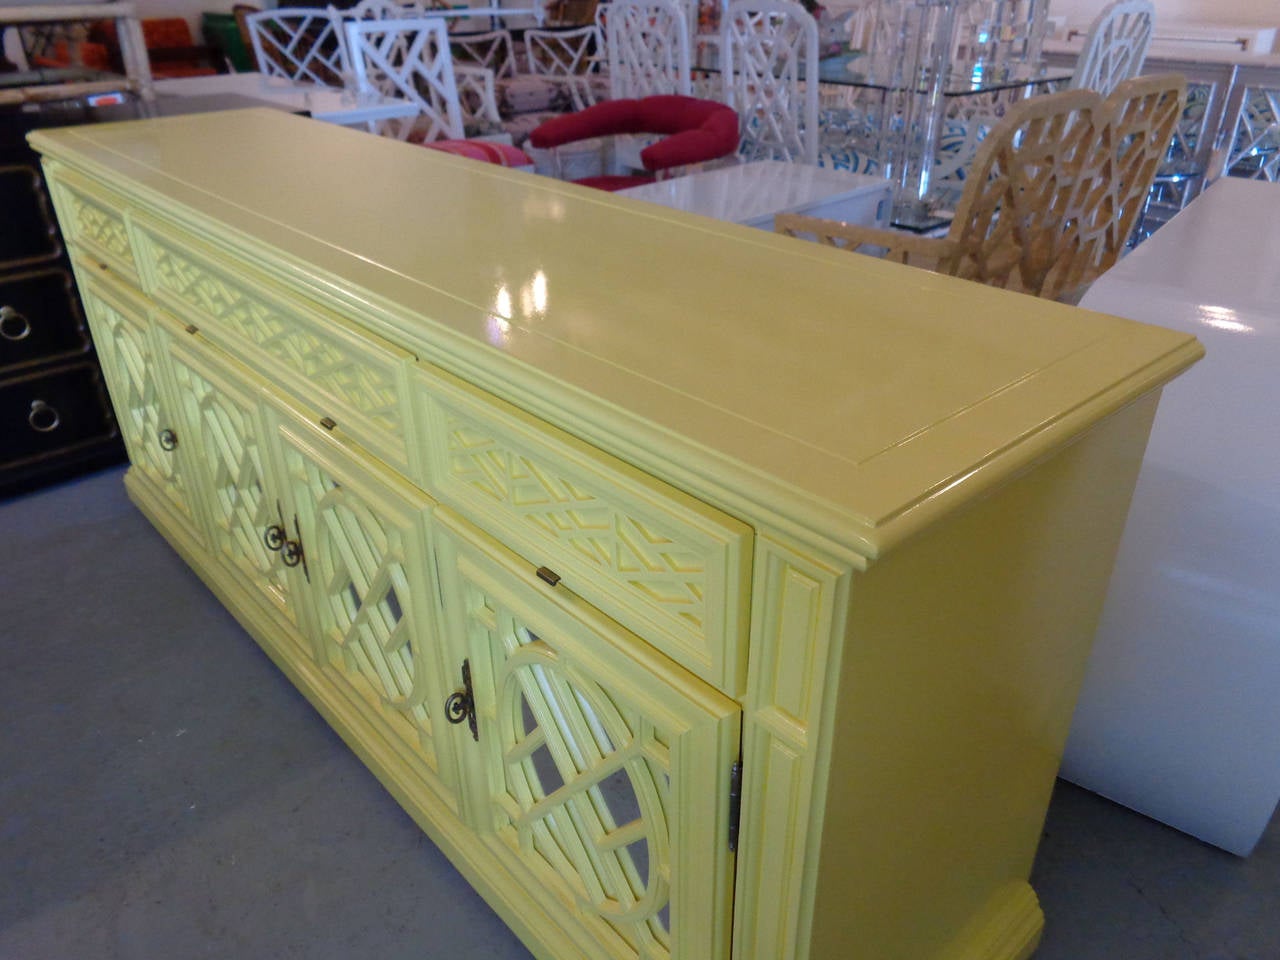 Hollywood Regency style Fretwork dresser or credenza in nice as found vintage condition. There are minor imperfections to newly lacquered finish. Benjamin Moore, delightfully yellow.